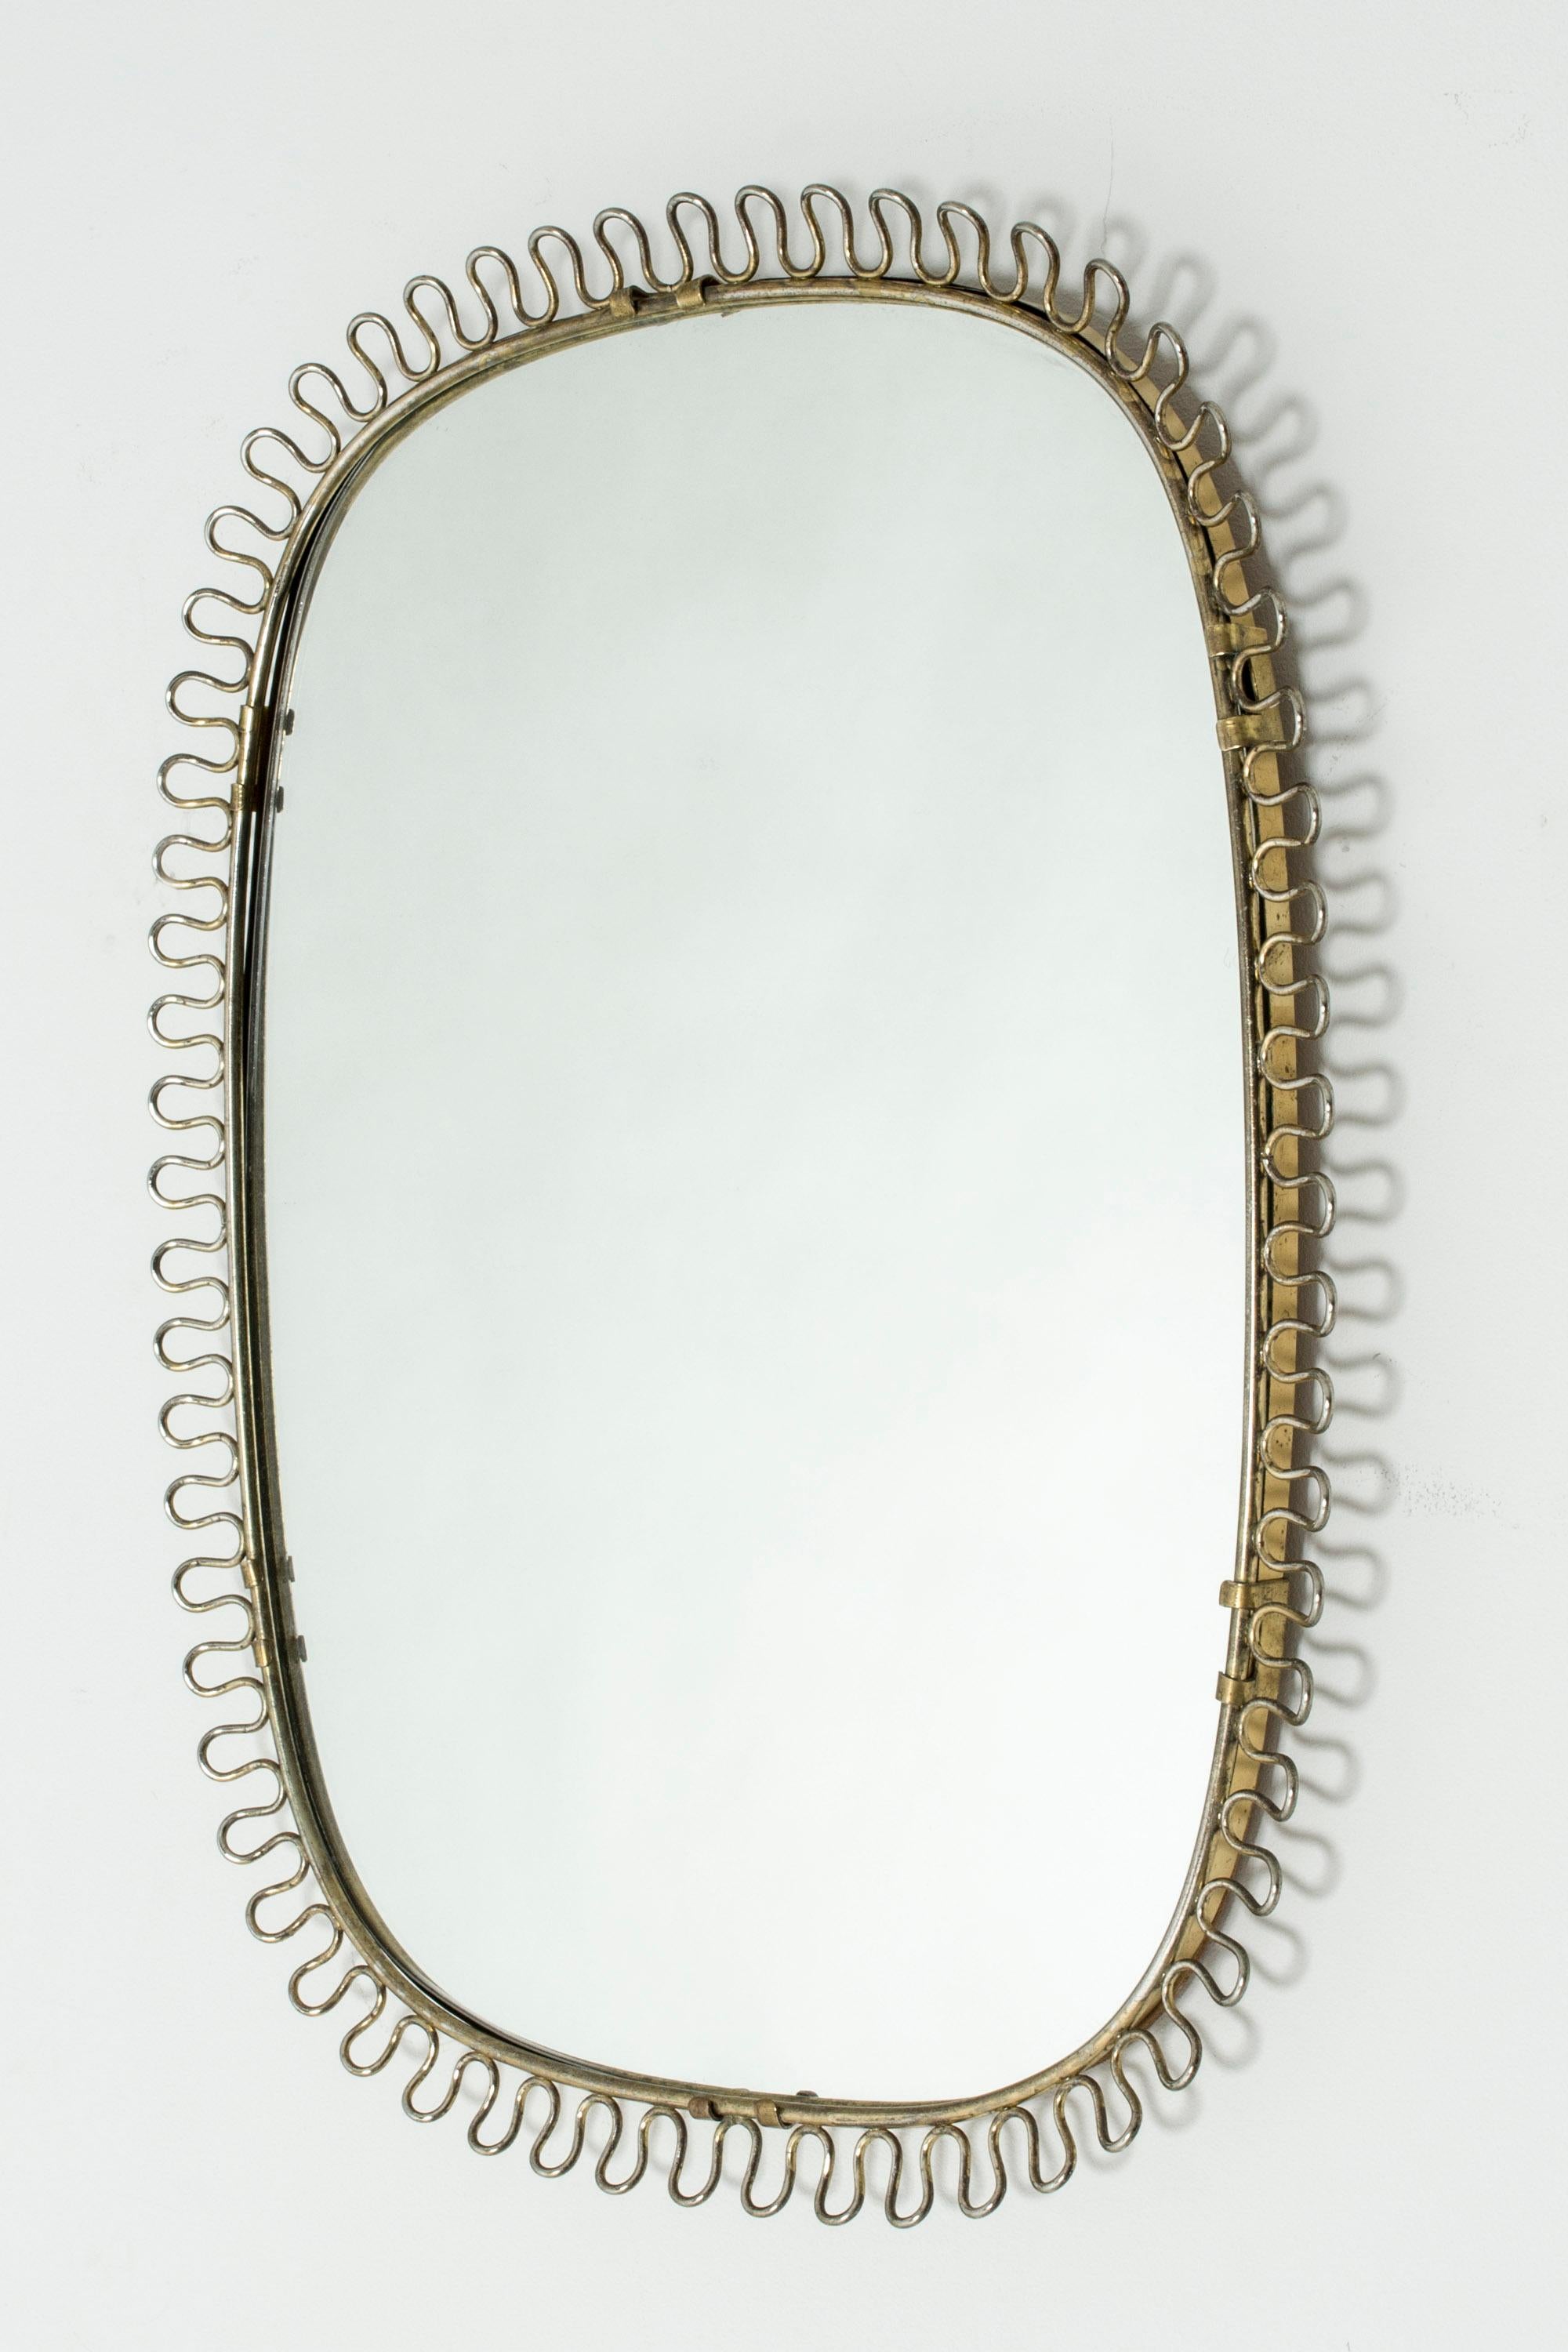 Lovely Swedish midcentury wall mirror in the style of Josef Frank. Made with a brass frame decorated with a wavy edge.